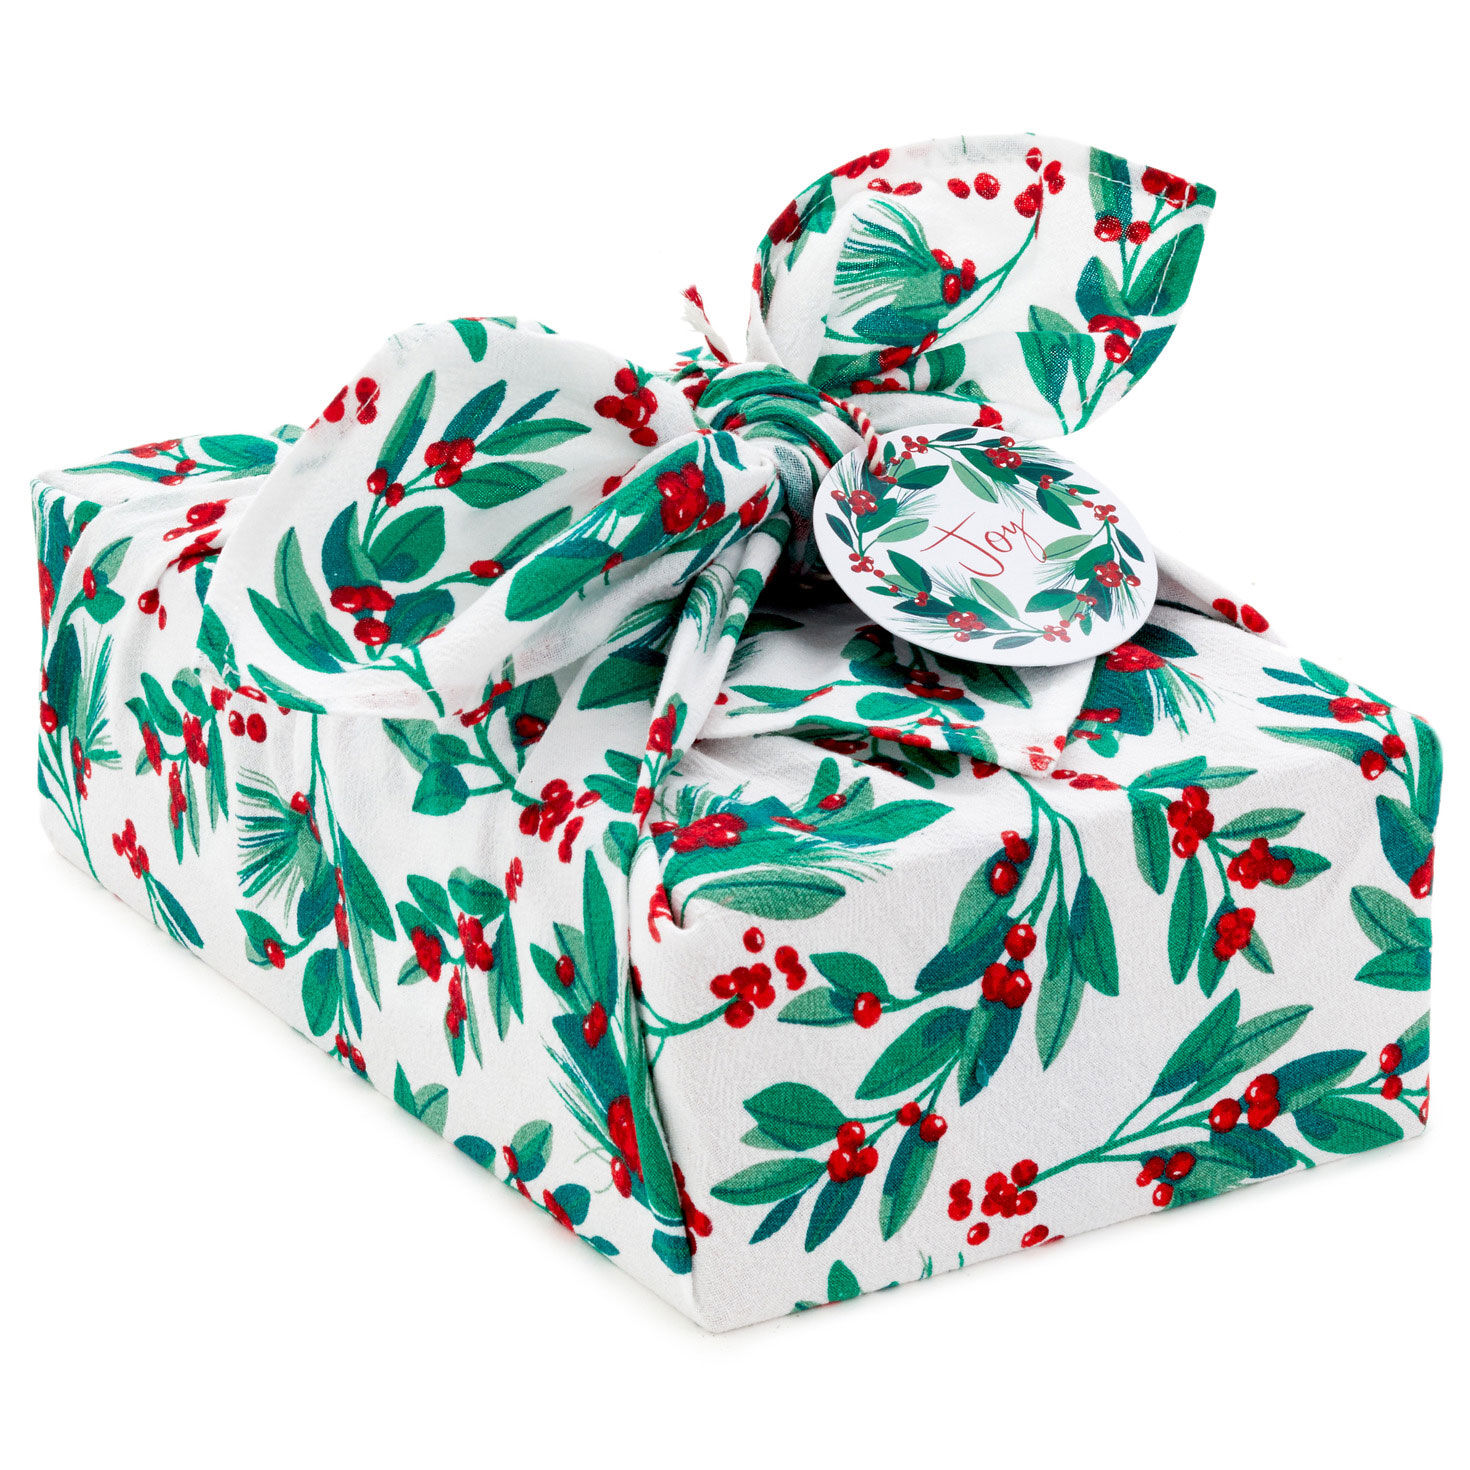 Hallmark White Tissue Paper, 100 Sheets for Christmas Gift Wrap, Holiday  Crafts and More